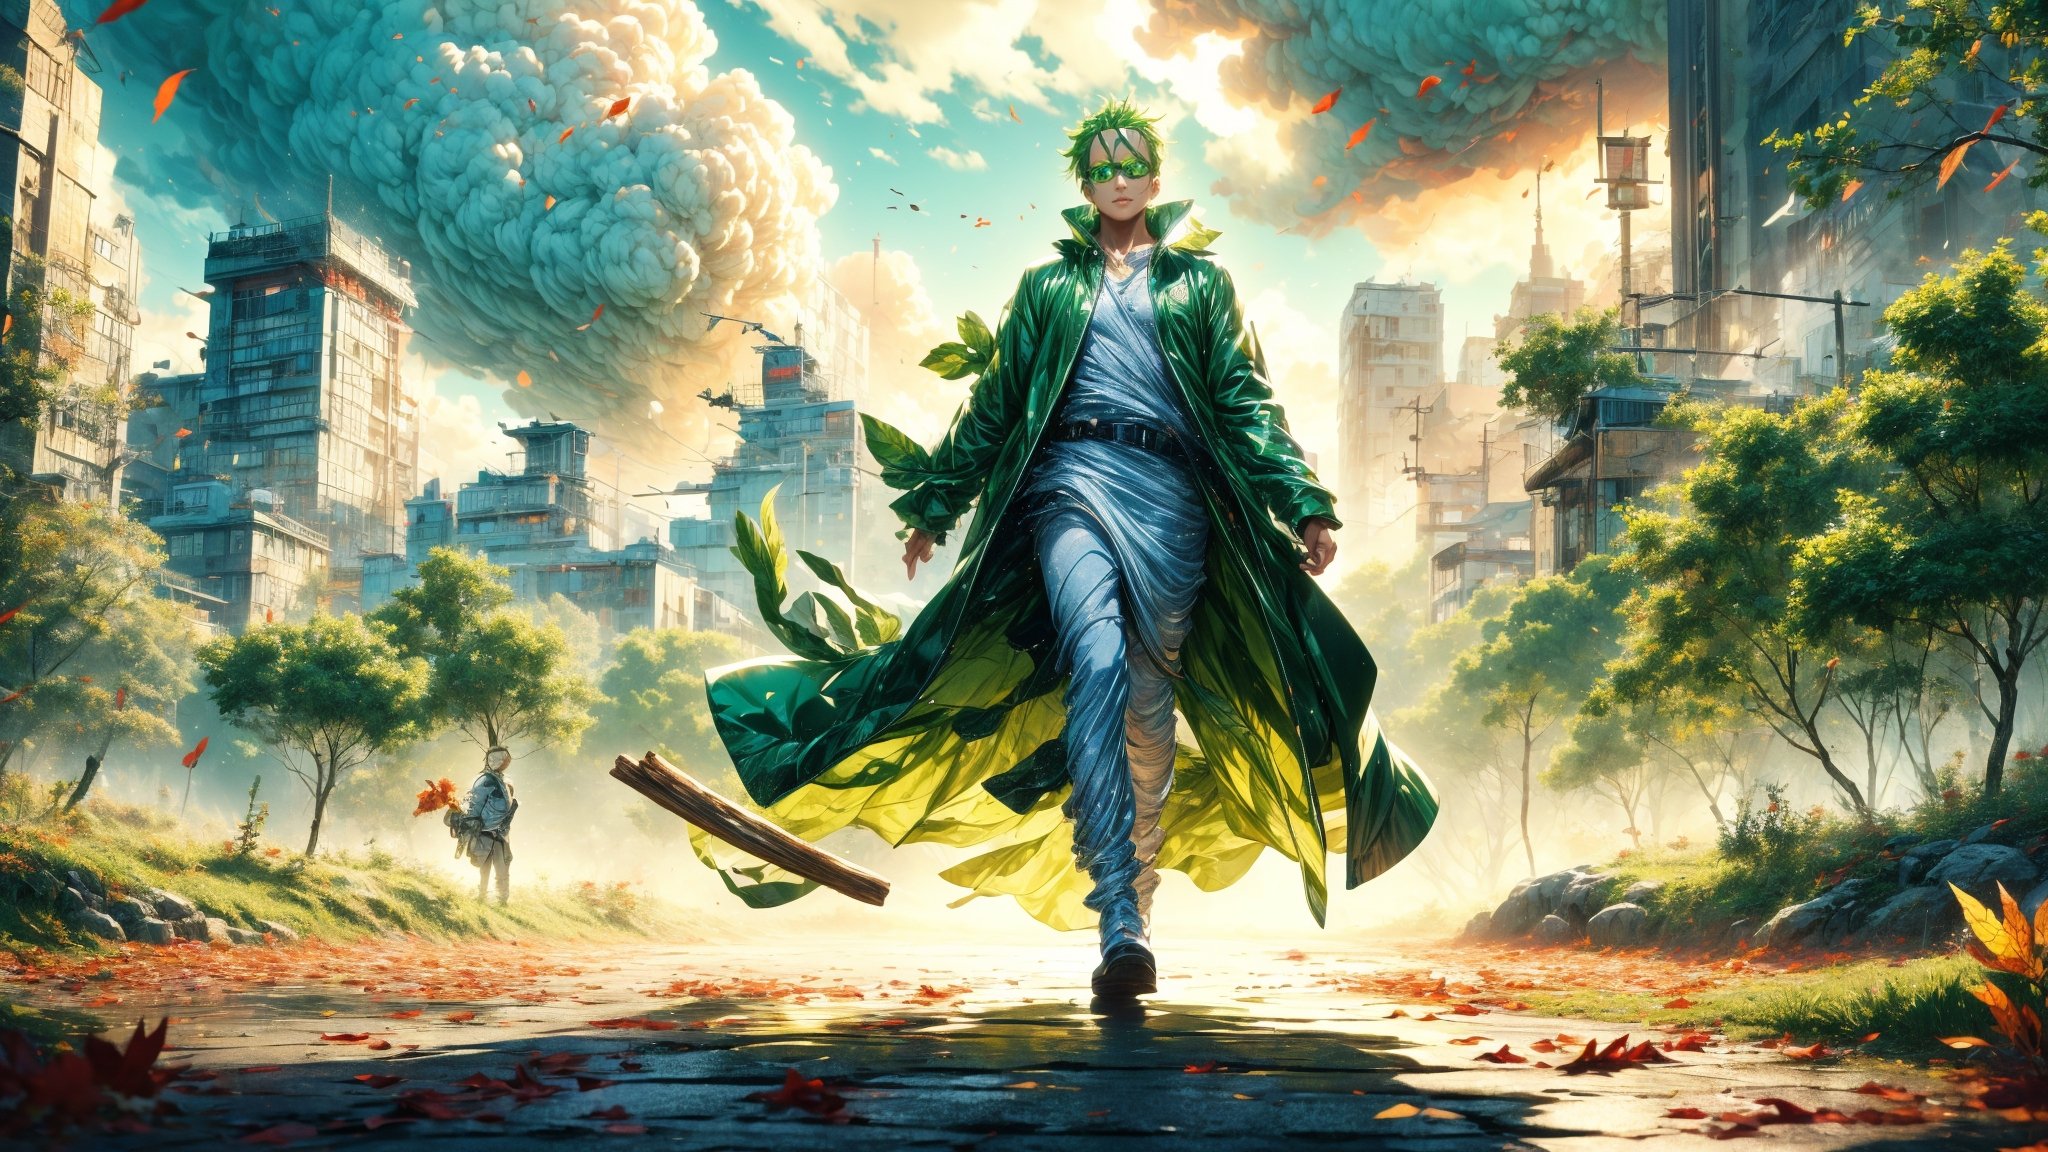 hyper detailed masterpiece, dynamic, awesome quality, large tempestuous DonM3l3m3nt4l, customized, comforting, steam, leaves, rustling leaves, concealed. solo, Roronoa Zoro, the iconic character from the One Piece anime: "Generate a striking and highly detailed visual representation of the legendary swordsman, Roronoa Zoro, from the One Piece anime. Zoro is known for his distinctive appearance and formidable skills. His hair is a vibrant shade of green, complementing his determined brown eyes. He stands tall and resolute, exuding an air of strength and unwavering determination. Zoro is clad in his signature green outfit, complete with a white haramaki and a bandana. In his skilled hands, he wields not one but two sticks, each one unique and finely detailed. The sticks should be a reflection of his mastery and the essence of his character. This image should capture the essence of Zoro's iconic appearance, showcasing his powerful presence and his status as one of the most beloved characters in the One Piece series." Photographic cinematic super high detailed super realistic image, 8k HDR super high quality image, masterpiece, perfect eyes, Zoro, ((perfect hands)), ((super high detailed image)), ((perfect sticks)), forest background